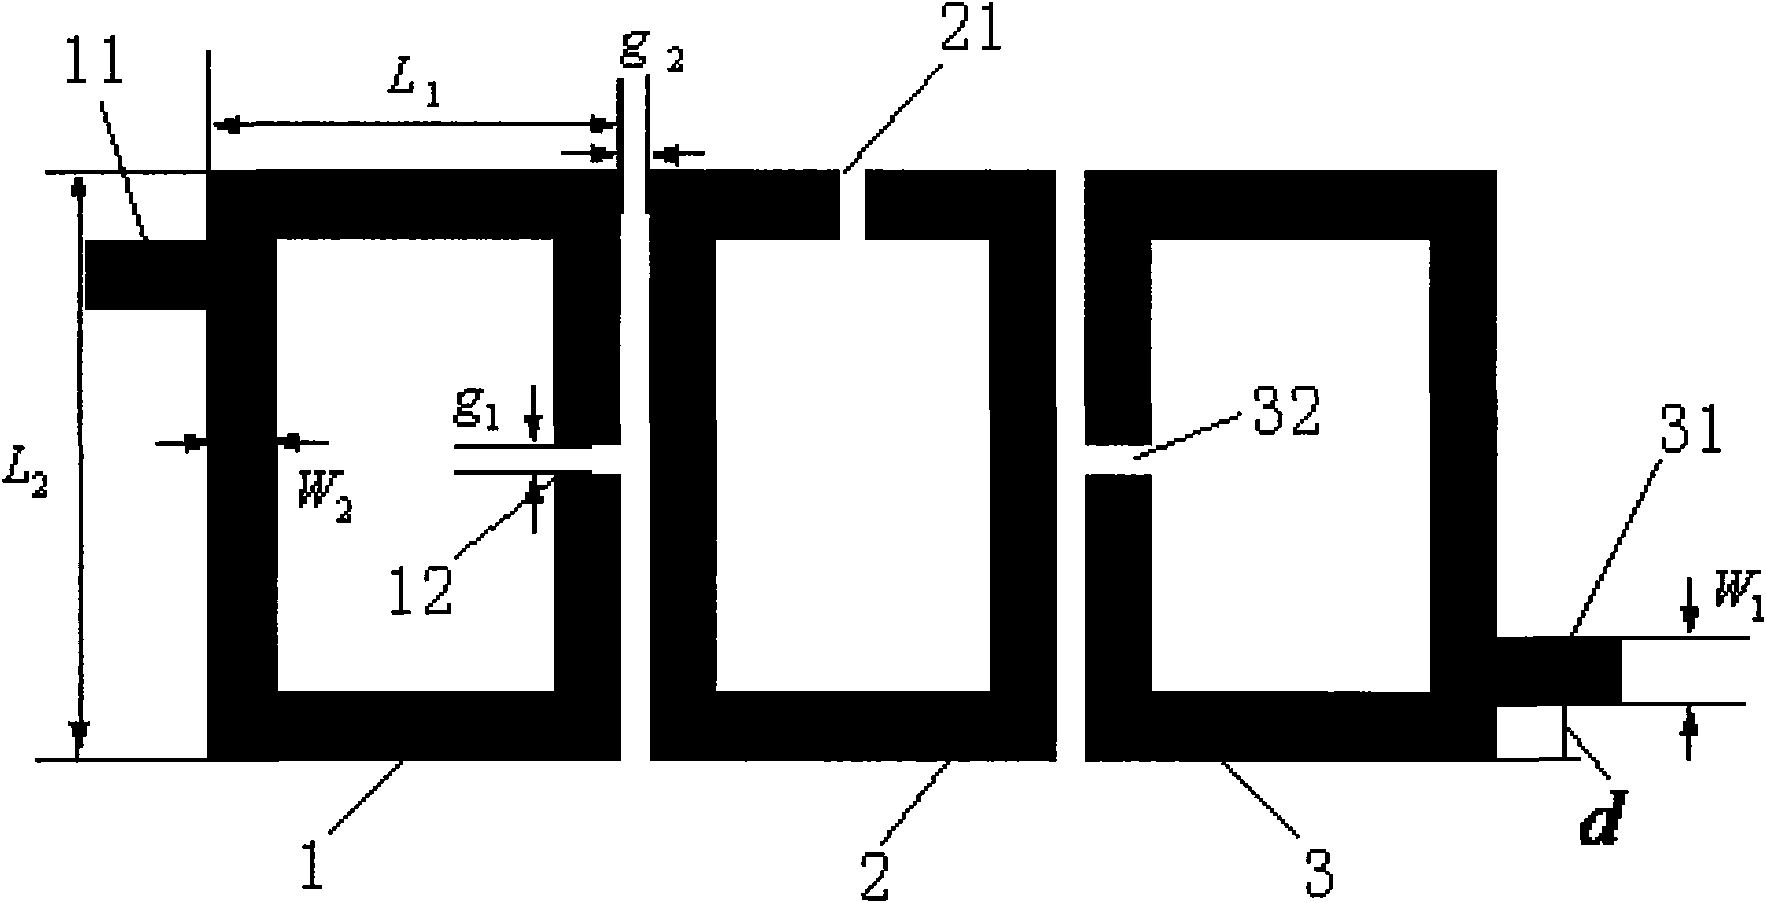 Band-pass filter capable of suppressing second harmonic